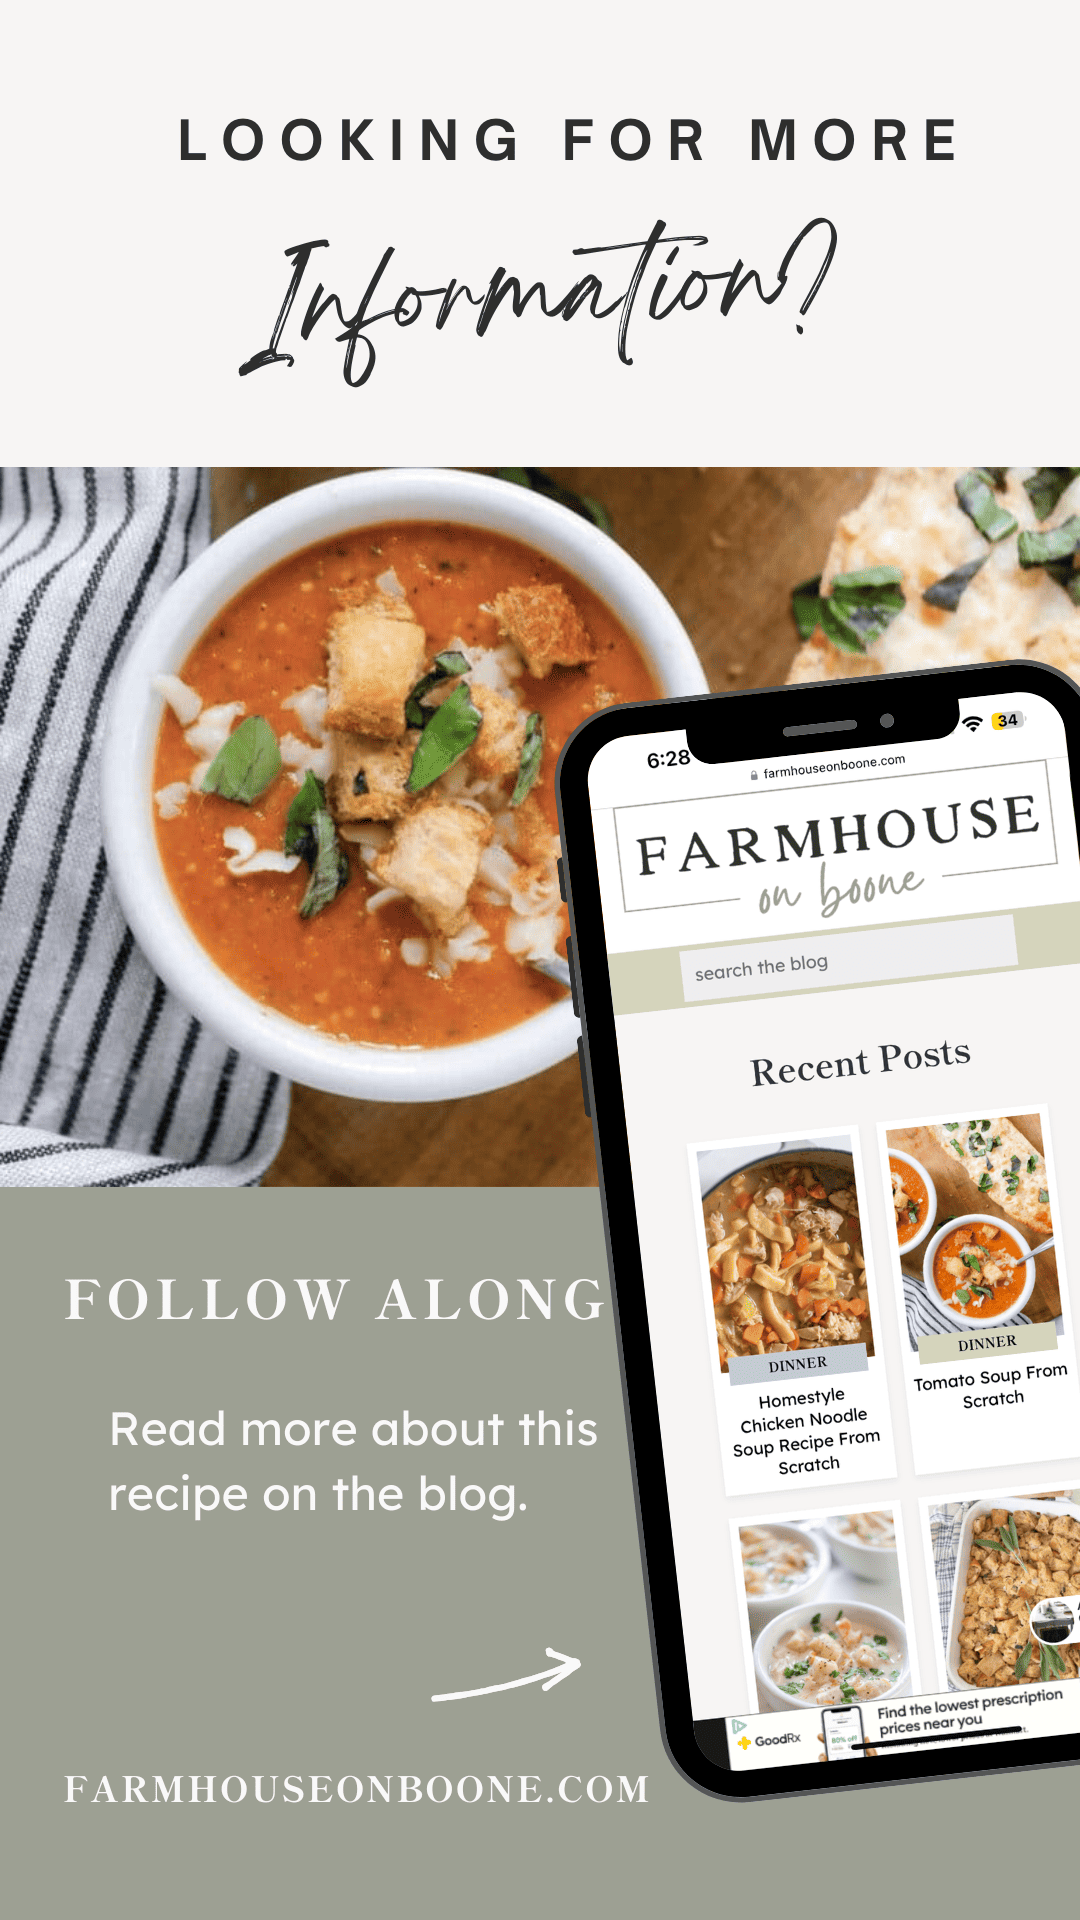 Tomato Soup From Scratch - Farmhouse on Boone